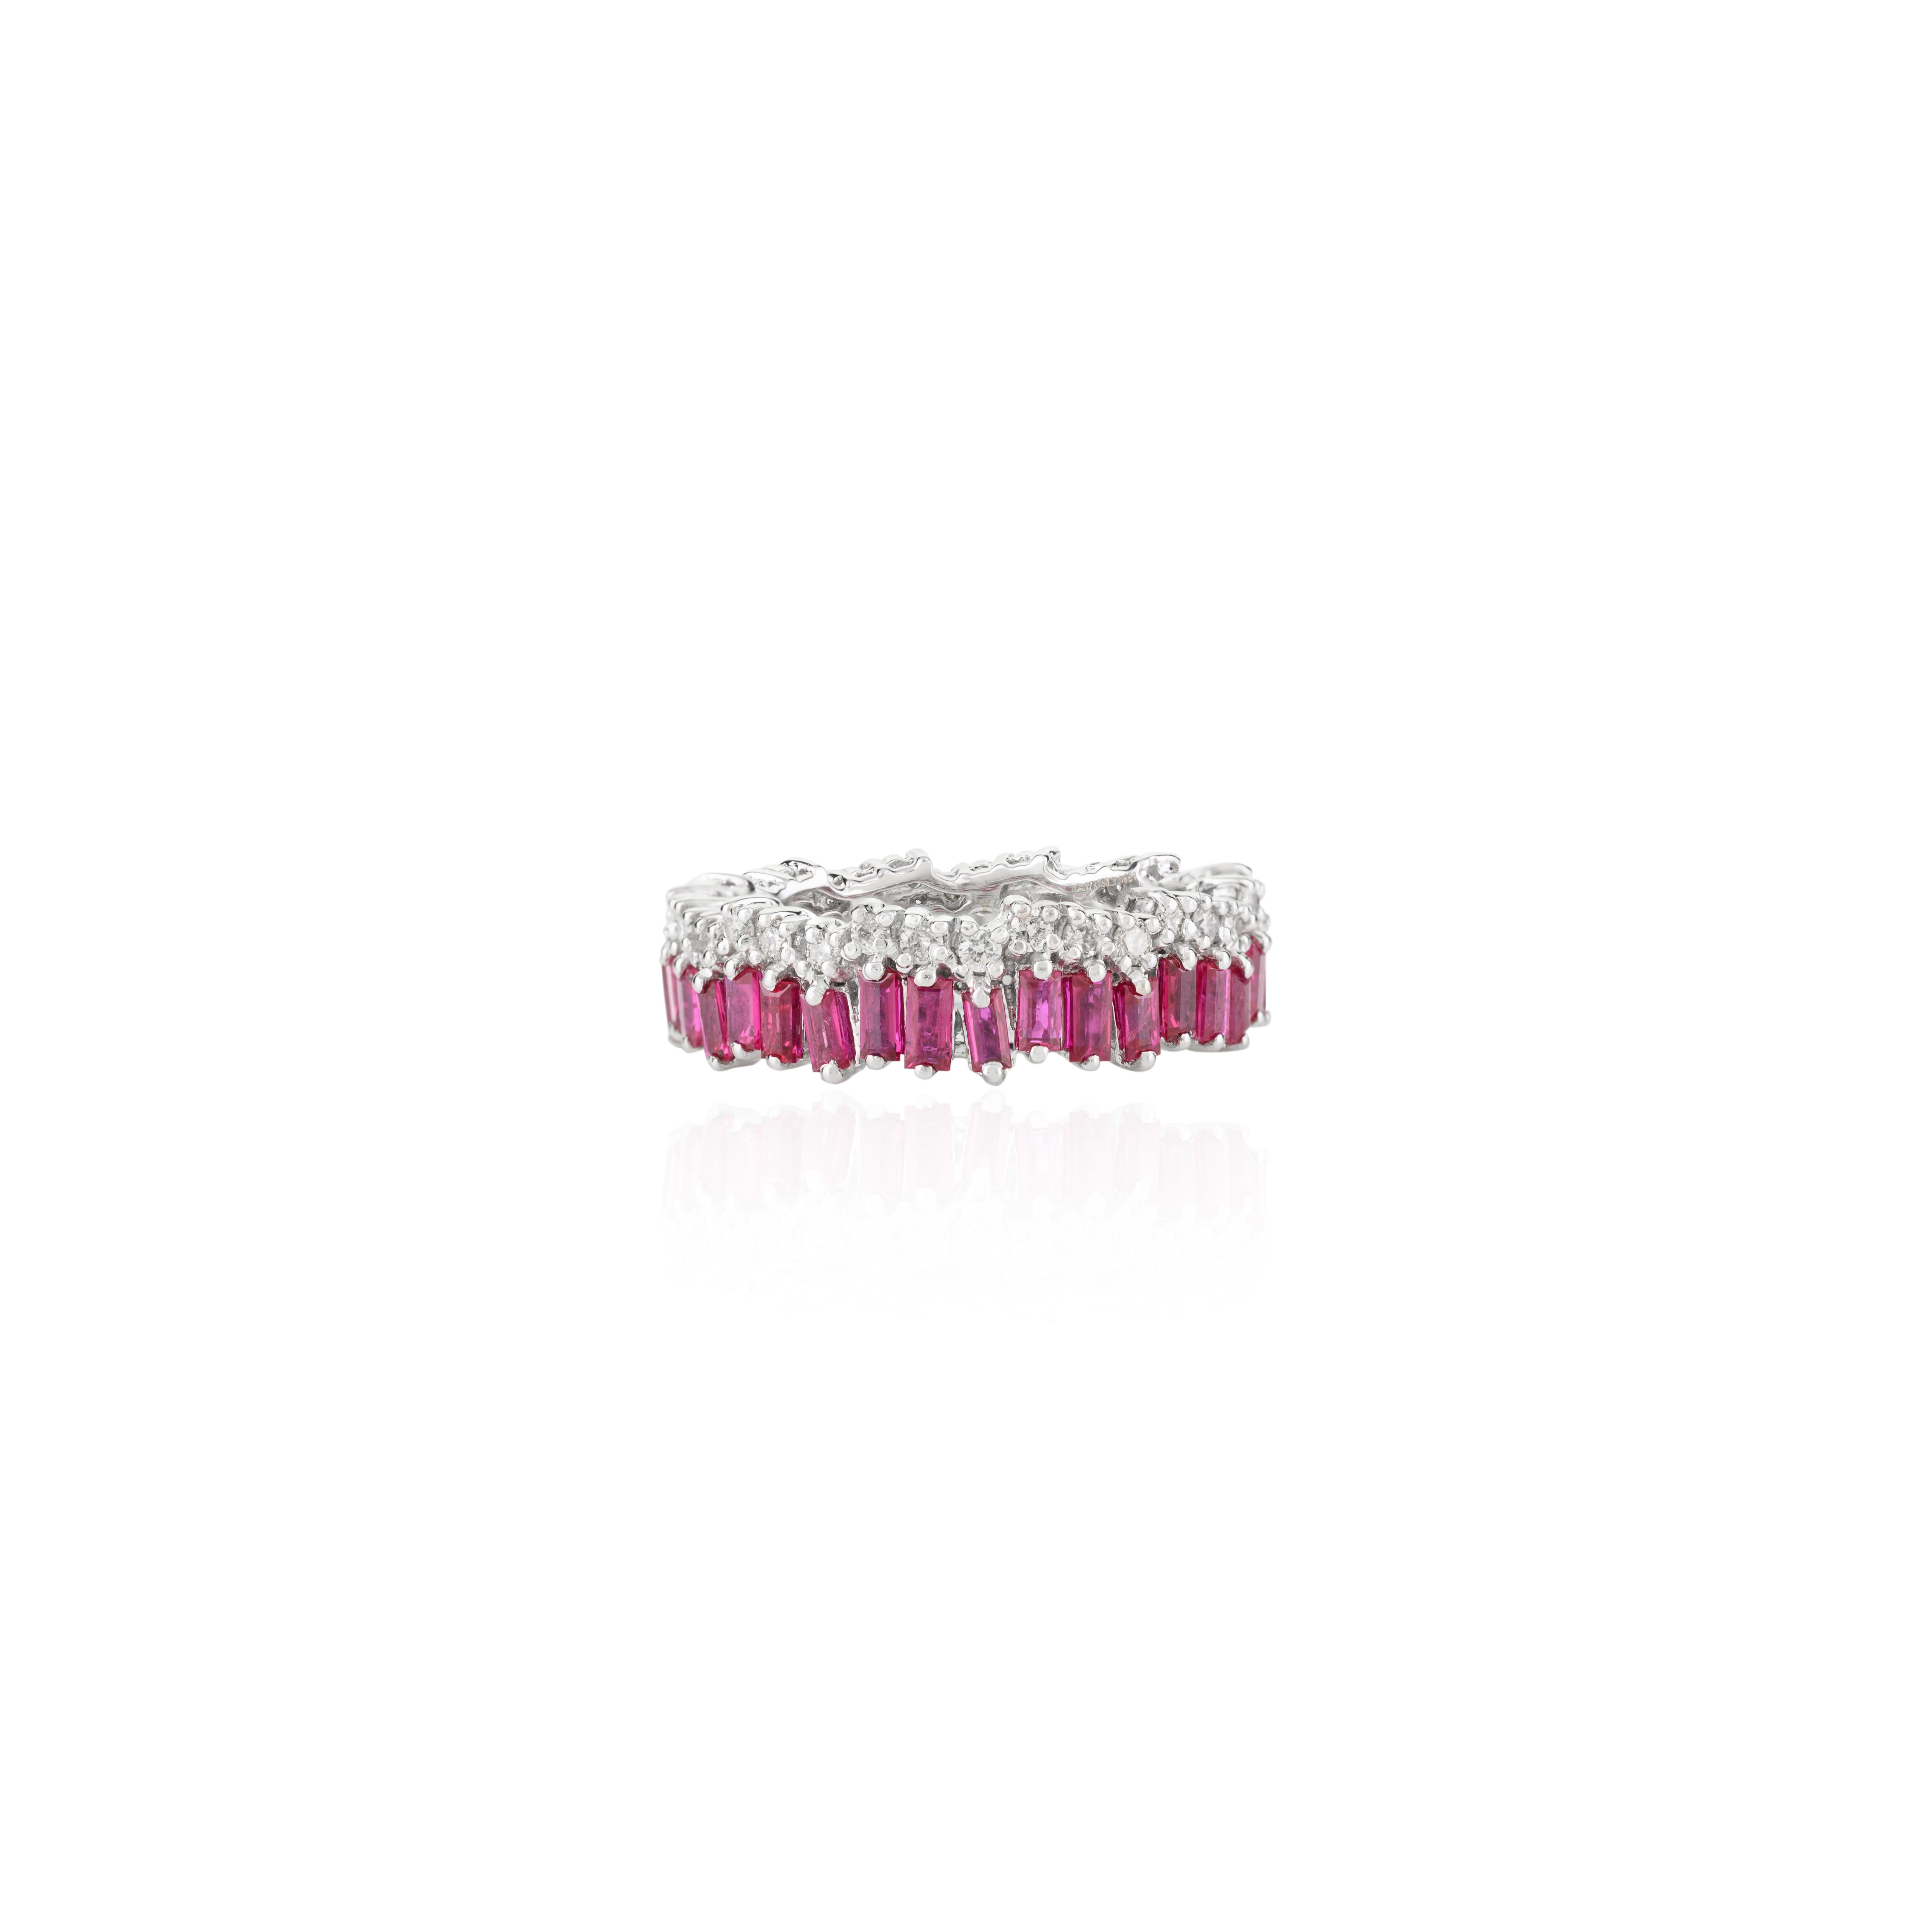 For Sale:  2.2 Carat Ruby and Diamond Engagement Band Ring in 18k White Gold 9